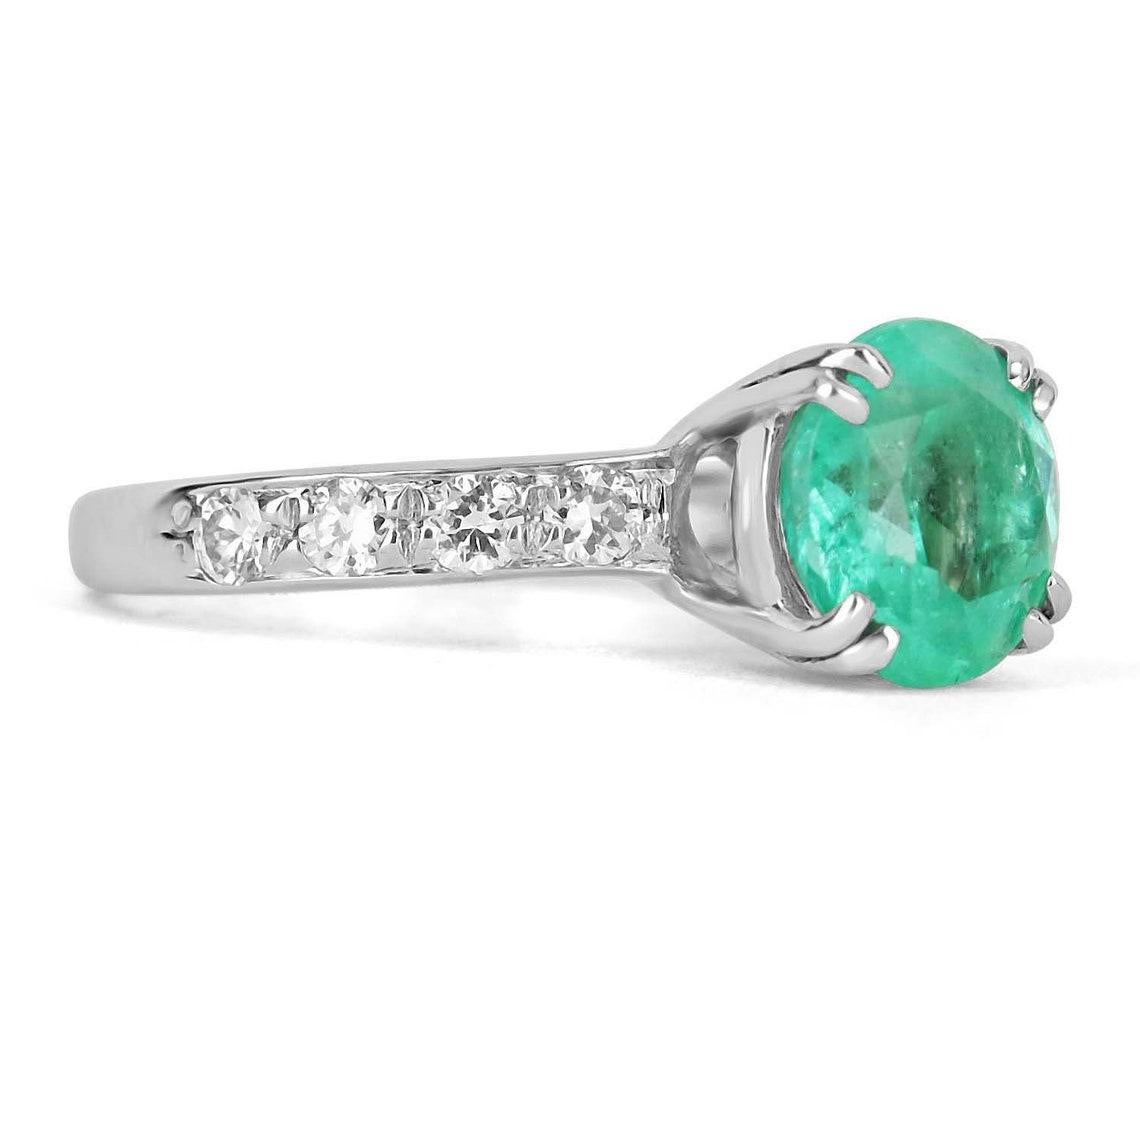 Elegantly displayed is a natural, round Colombian emerald and diamond accent engagement ring. The center gem is a round emerald filled with life and brilliance! Among the emeralds impressive qualities are its vibrant color and beautiful eye clarity.